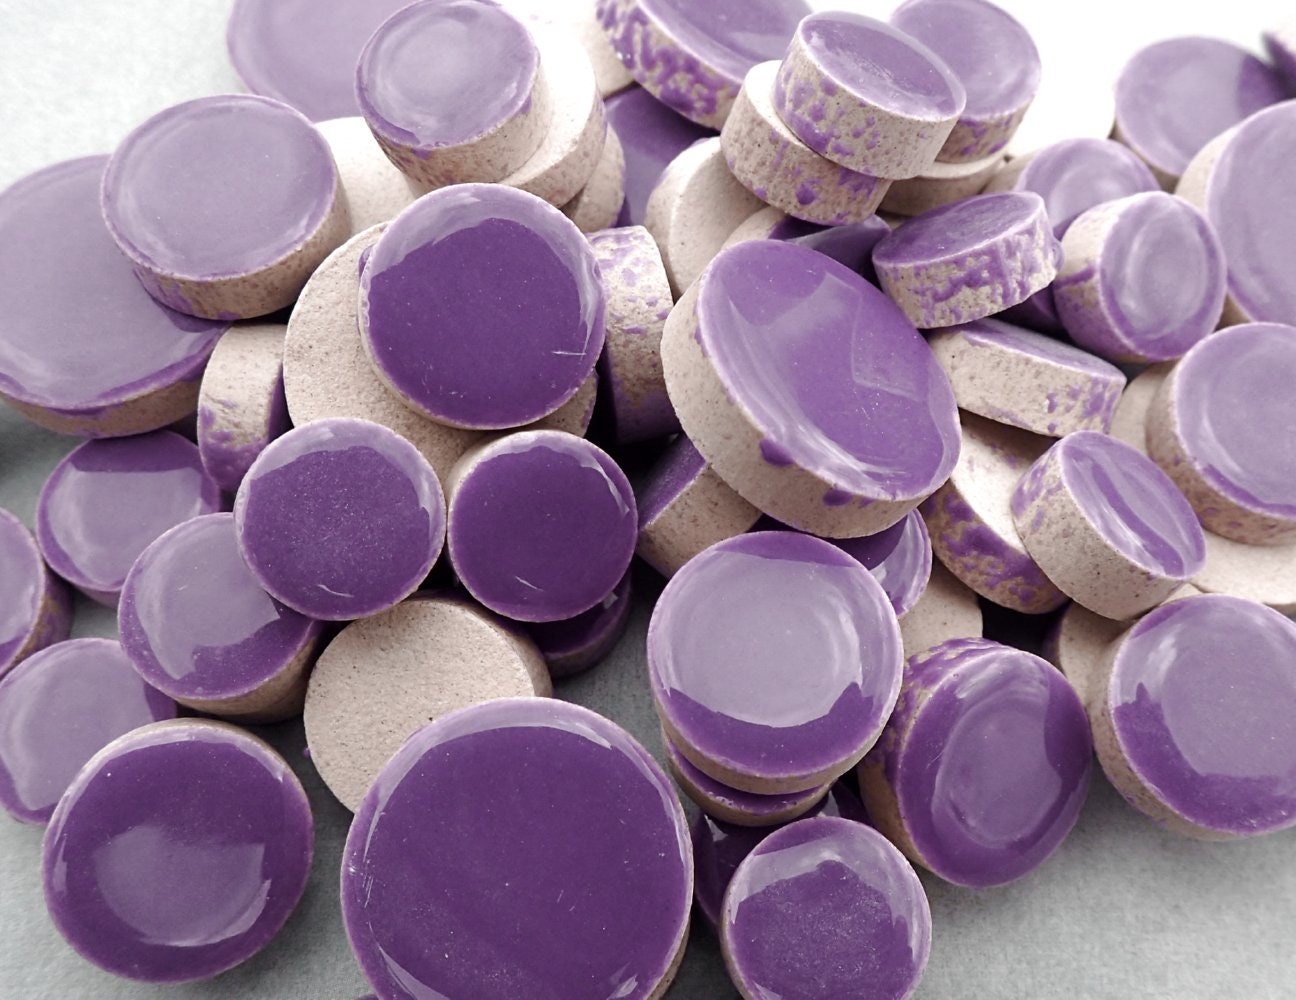 Purple Circles Mosaic Tiles - 50g Ceramic in Mix of 3 Sizes 1/2" and 3/4" and 5/8"